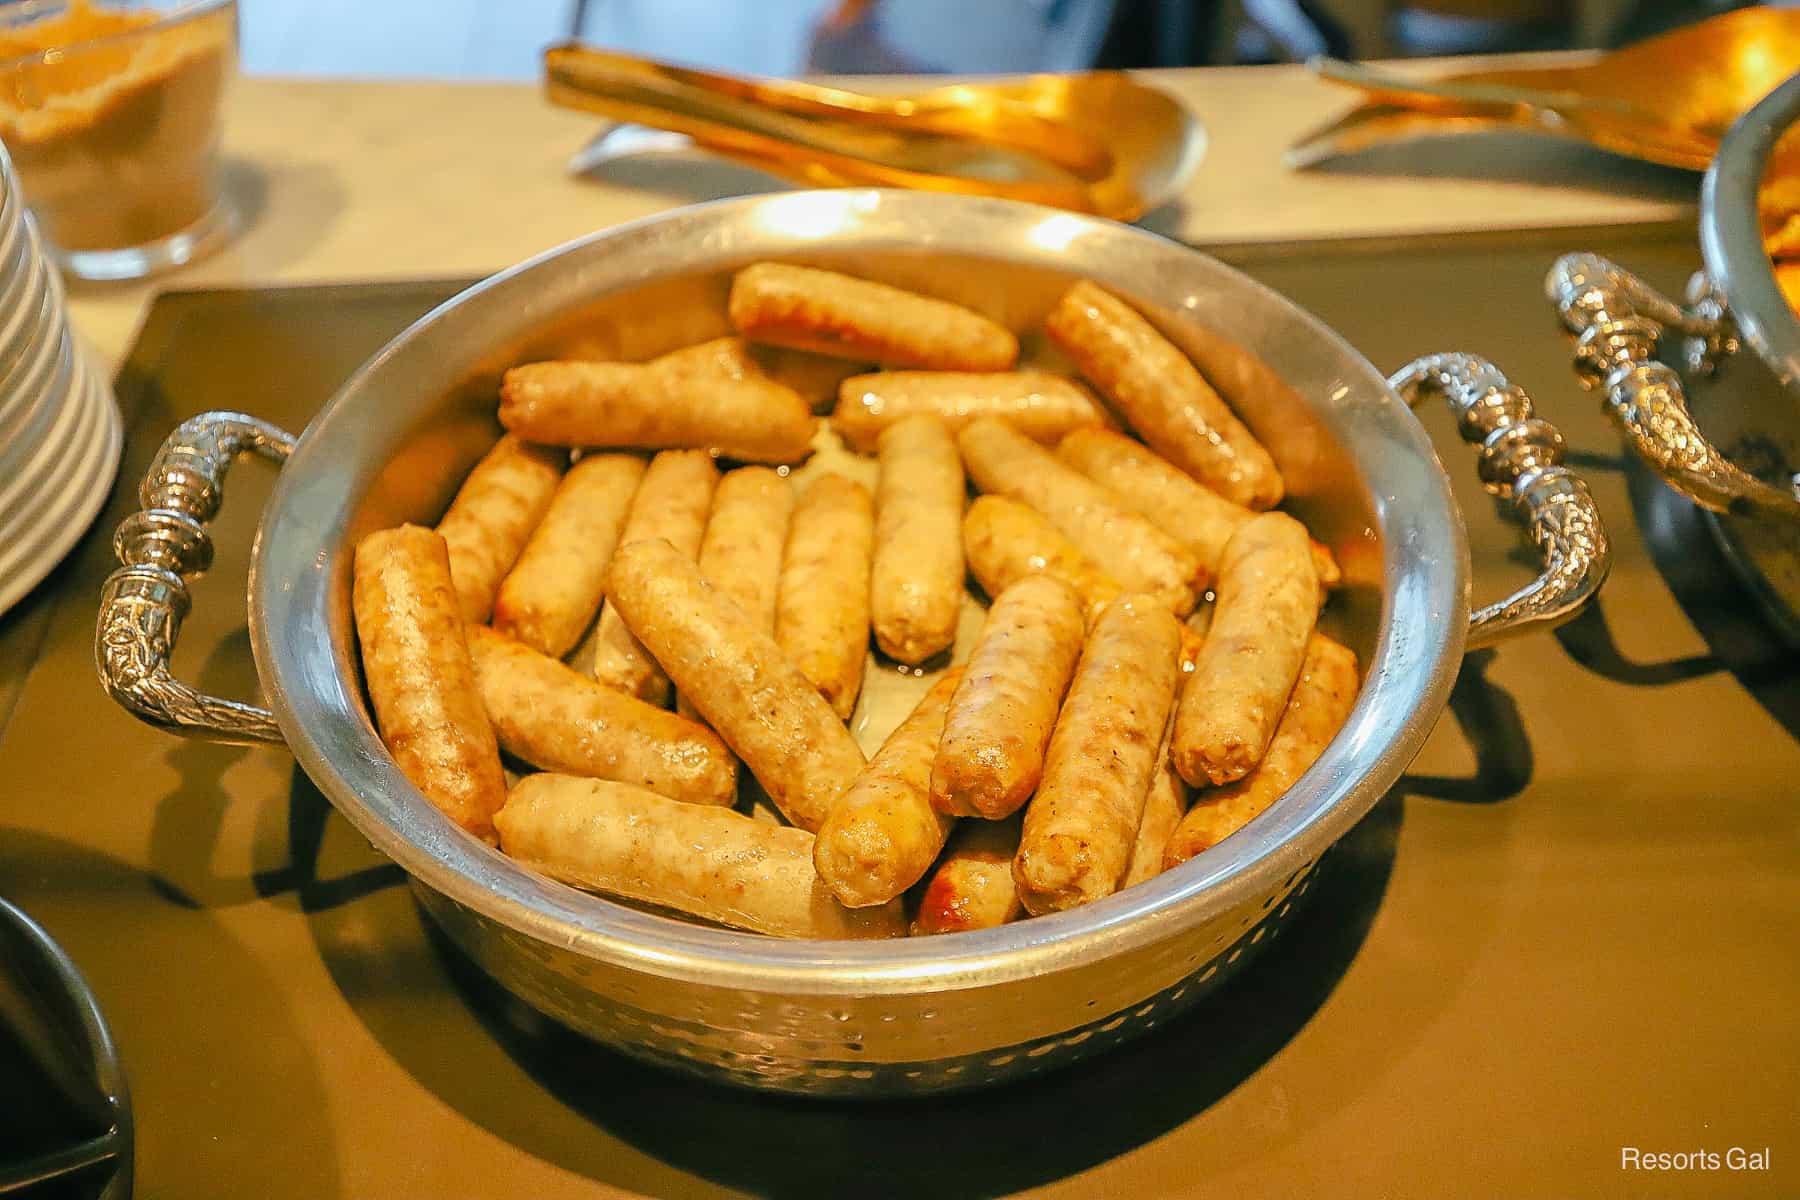 a tray filled with sausages during breakfast at the Chronos Club 